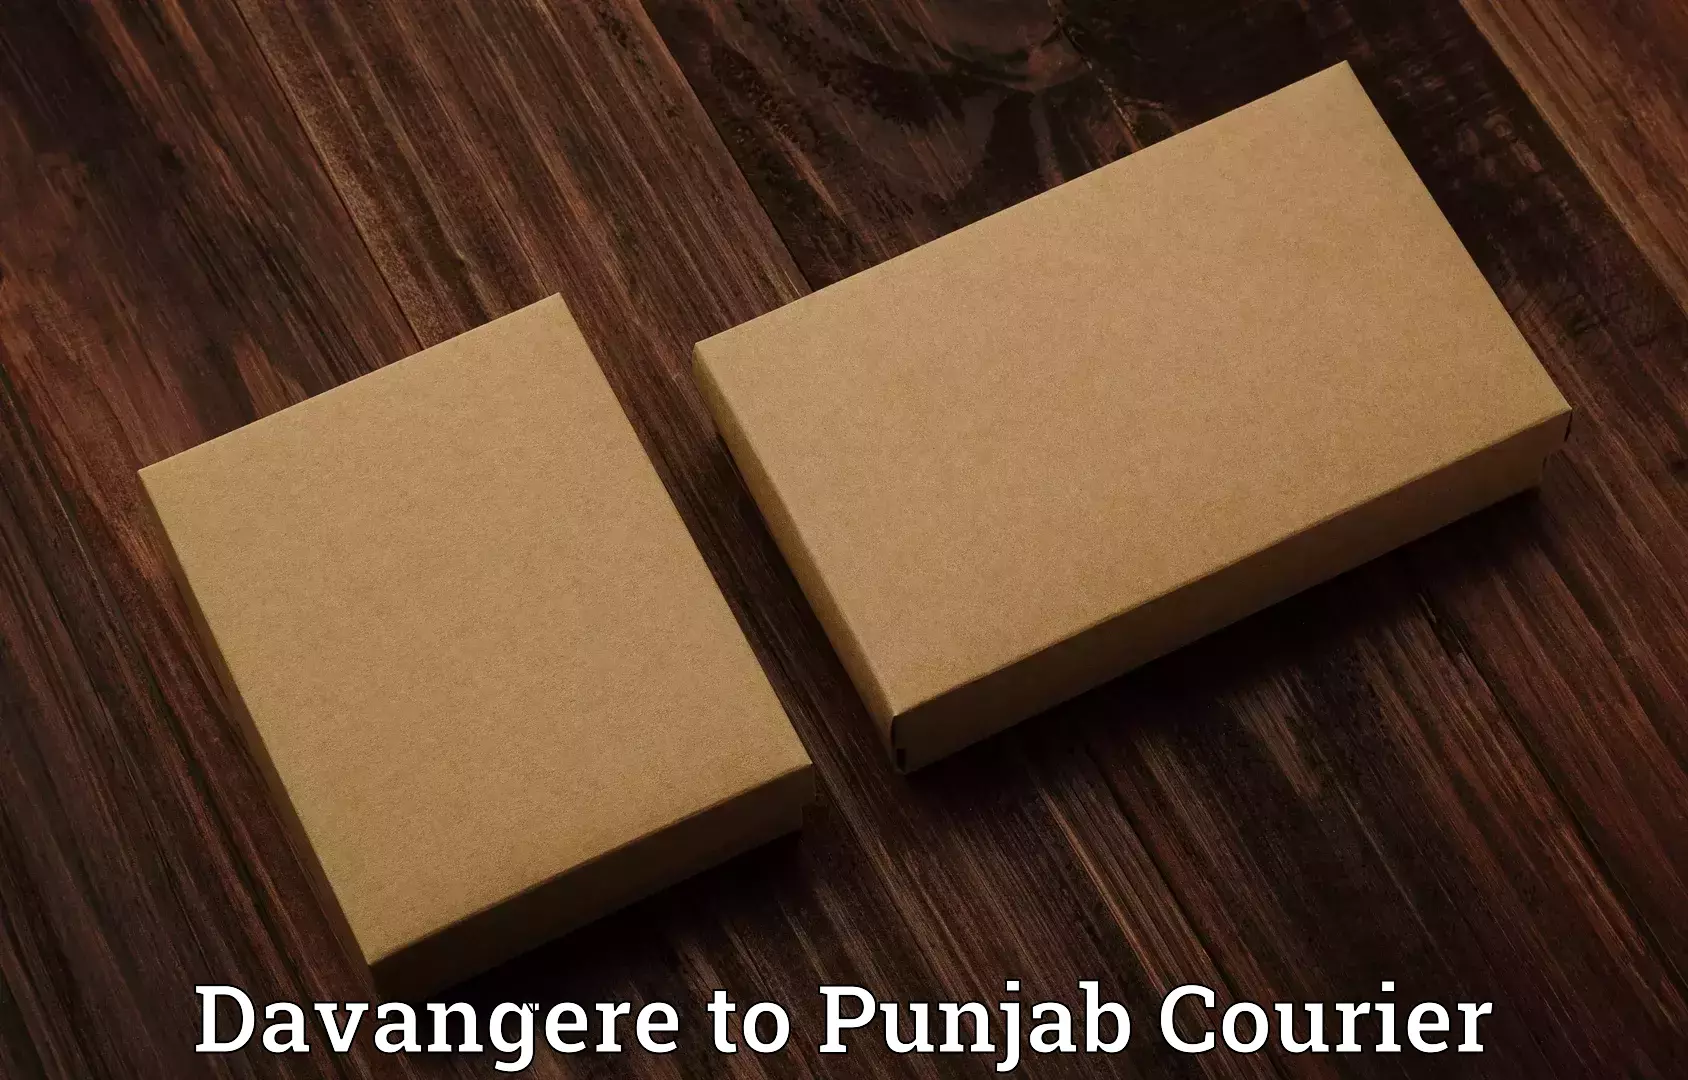 Luggage transport consultancy Davangere to Punjab